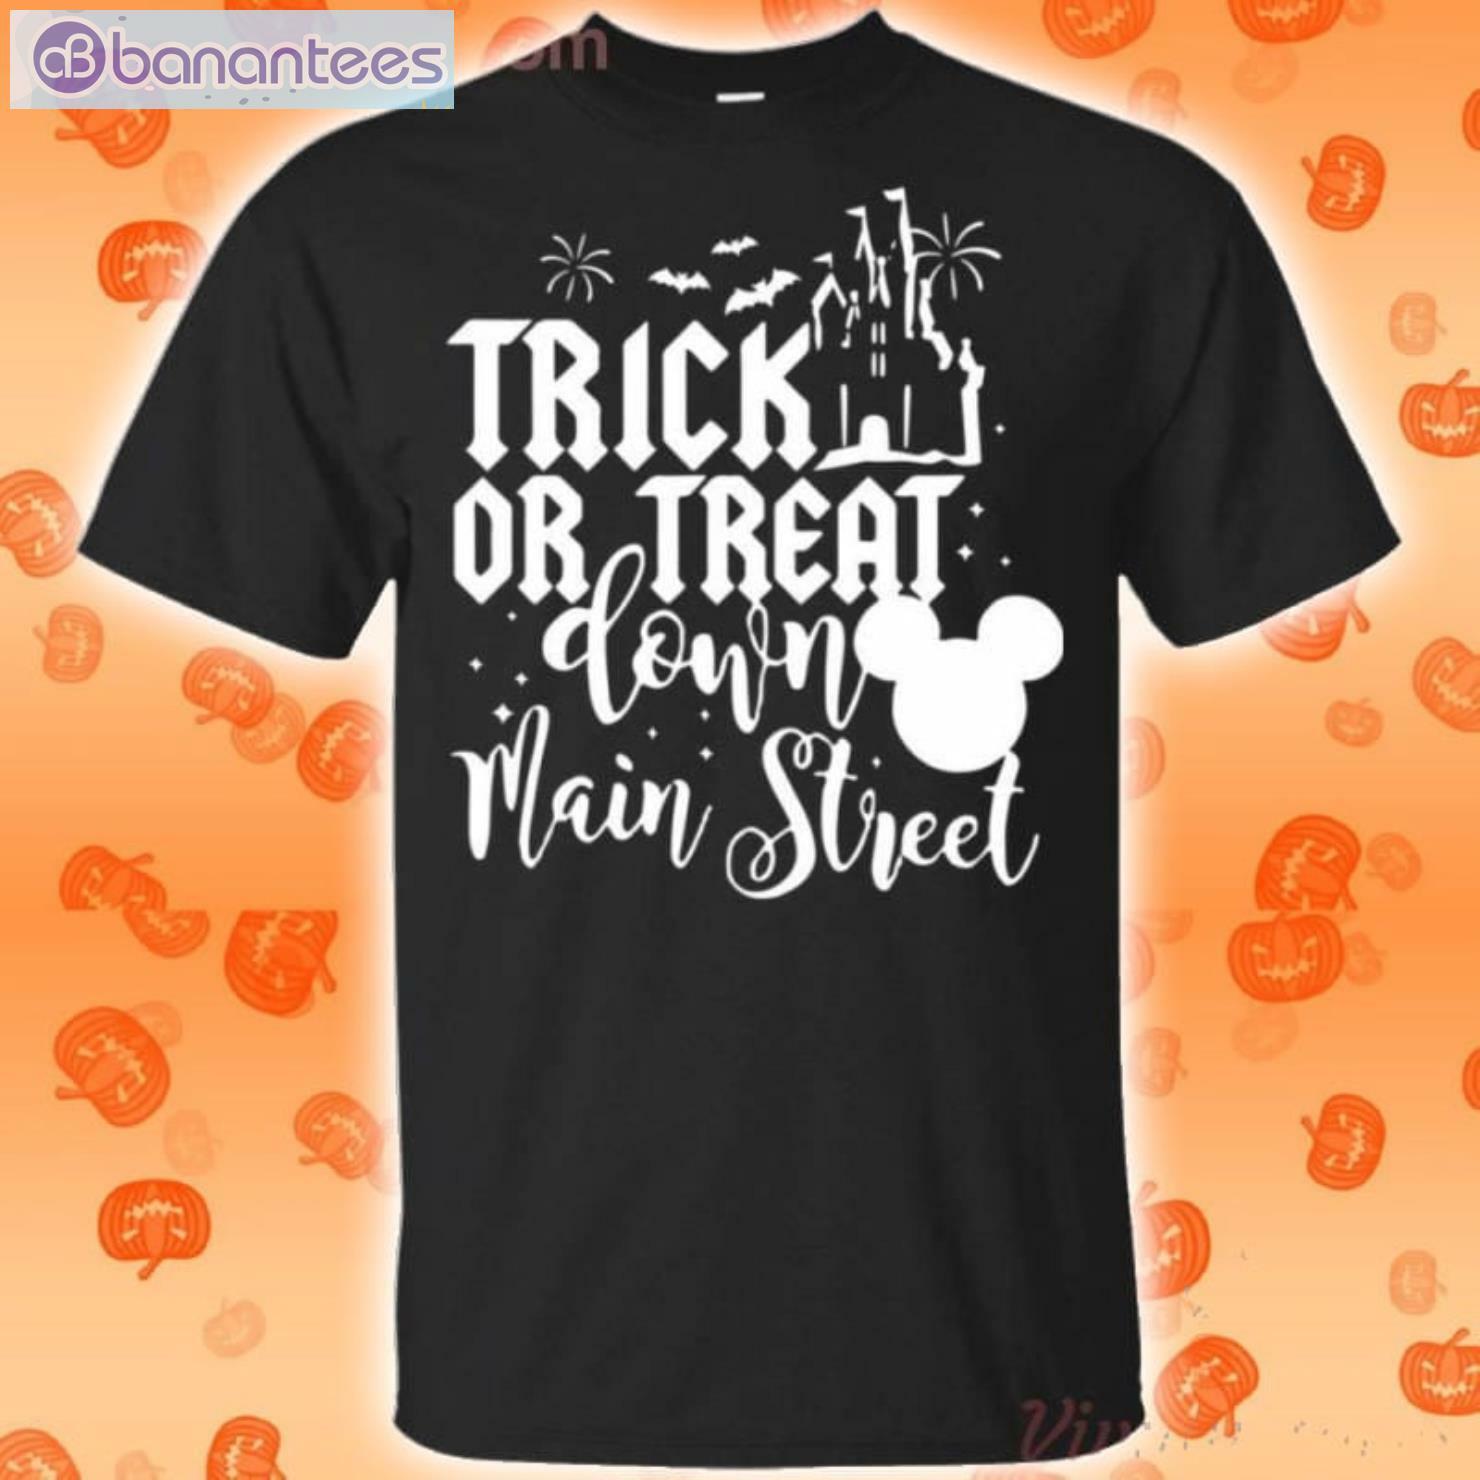 Happy Halloween Trick Or Treat Down Main Street T-Shirt Product Photo 1 Product photo 1